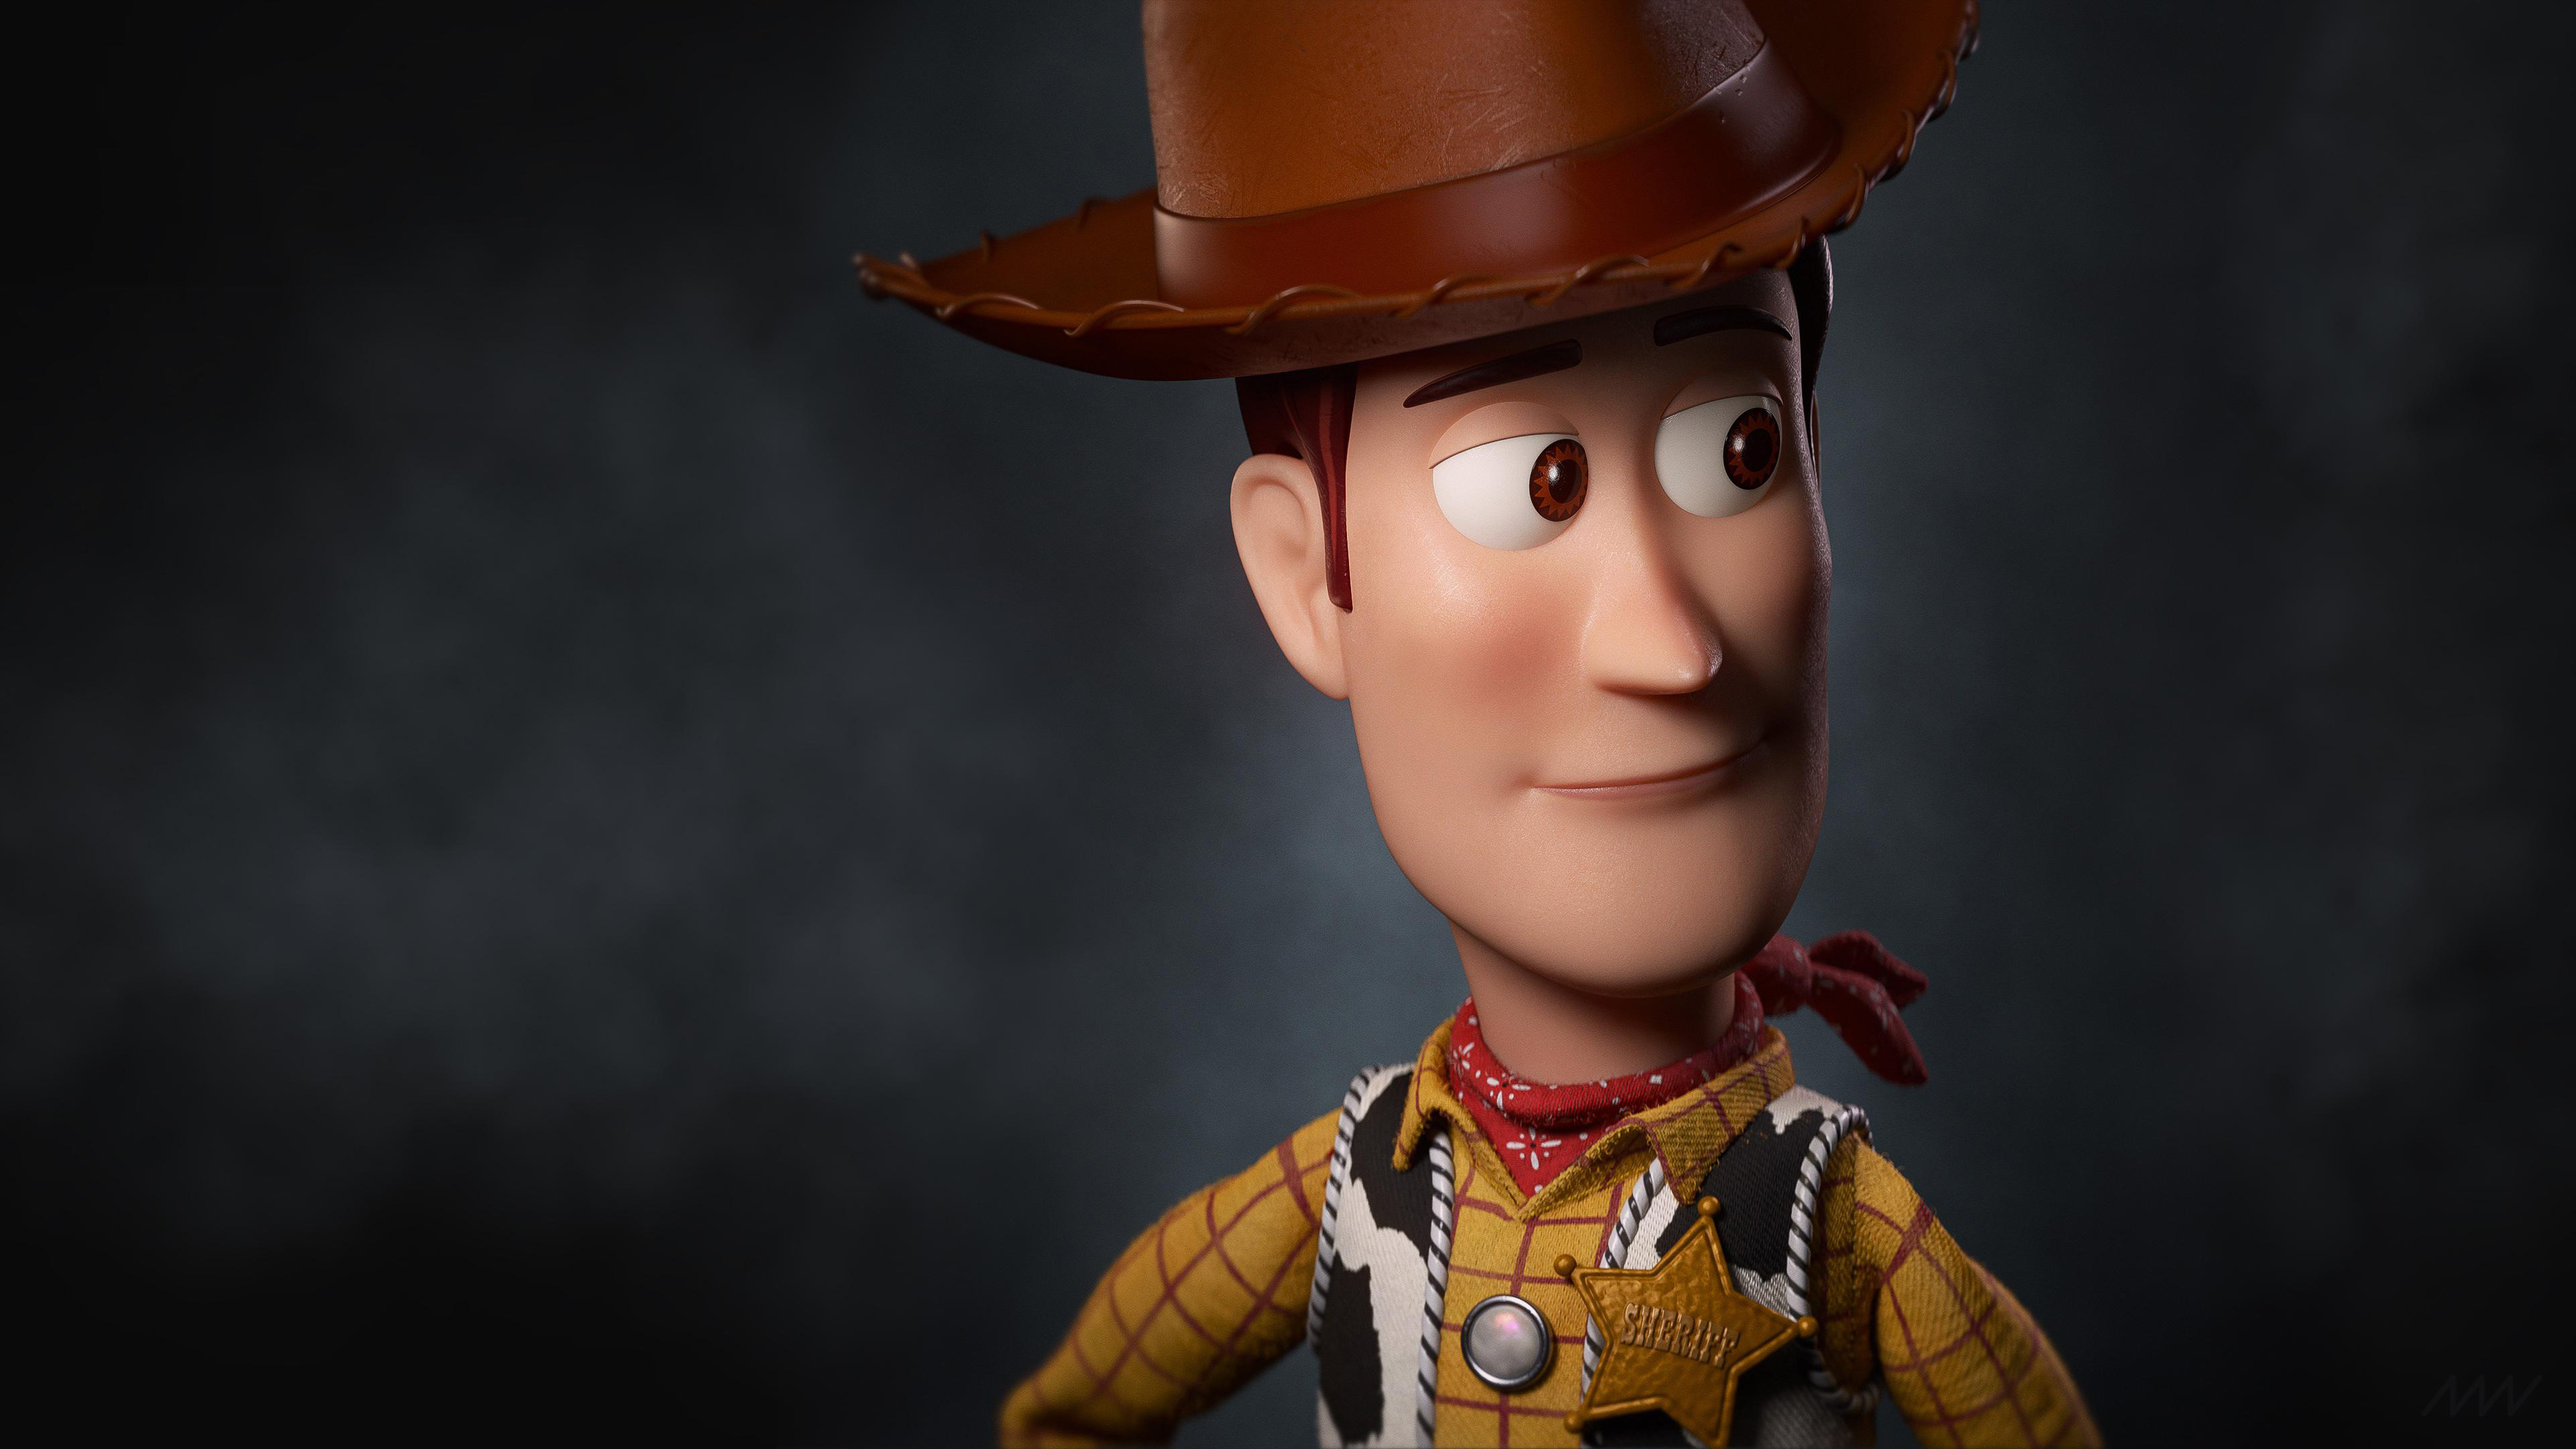 3840x2160 Woody Toy Story 4 4k HD 4k Wallpapers, Images, Backgrounds